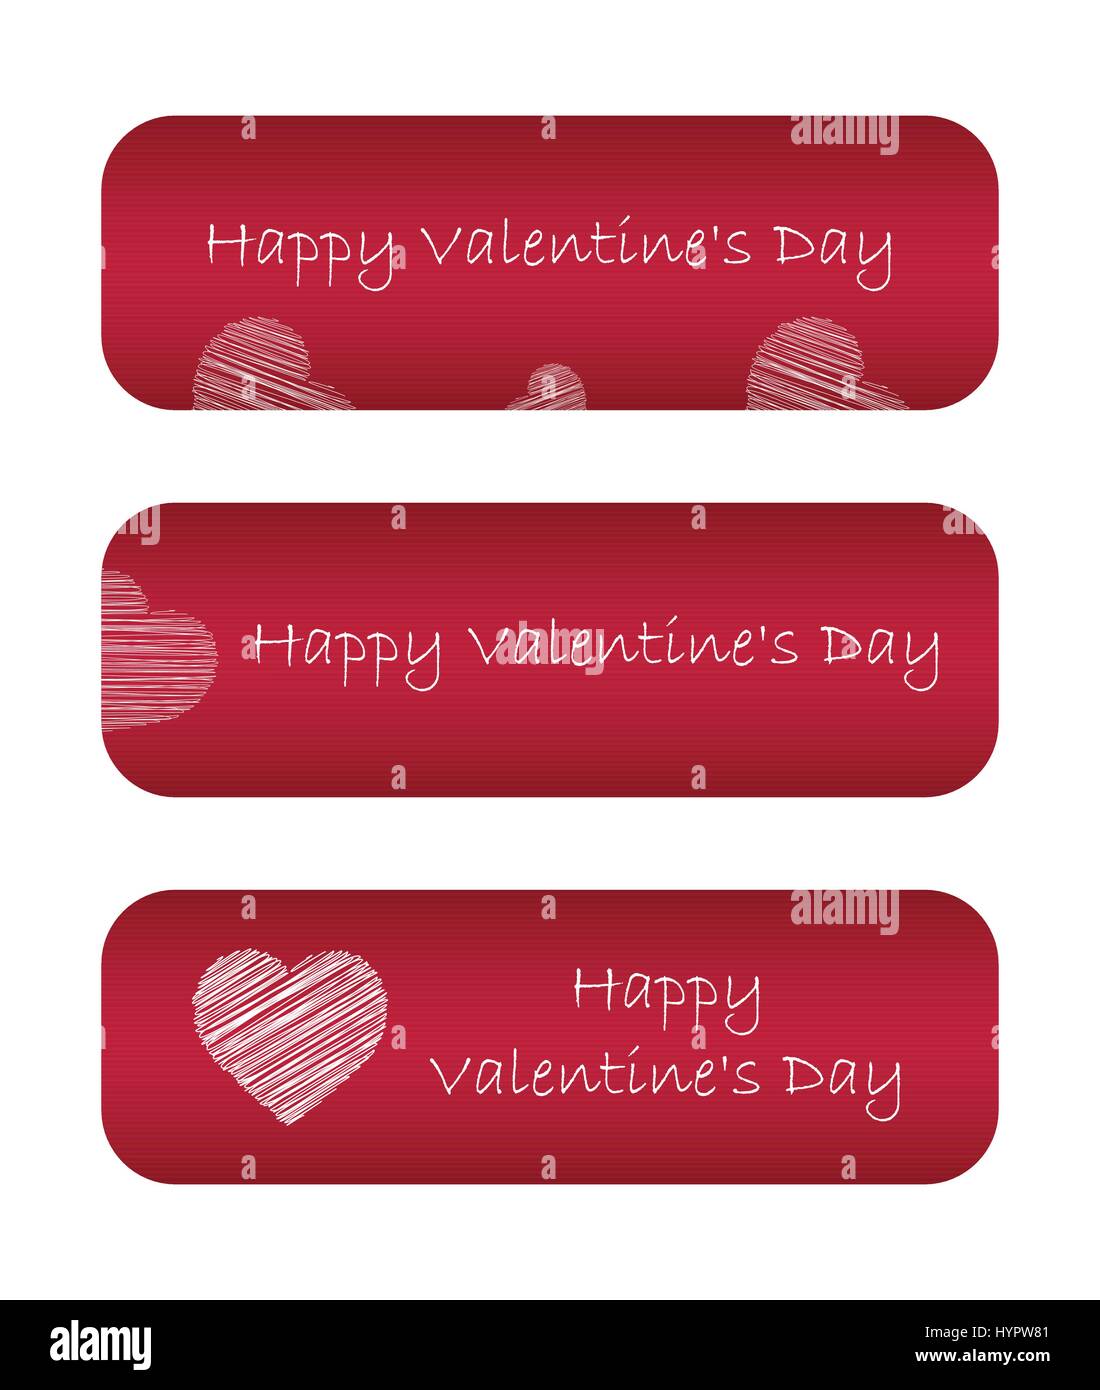 Valentine day banners Stock Vector